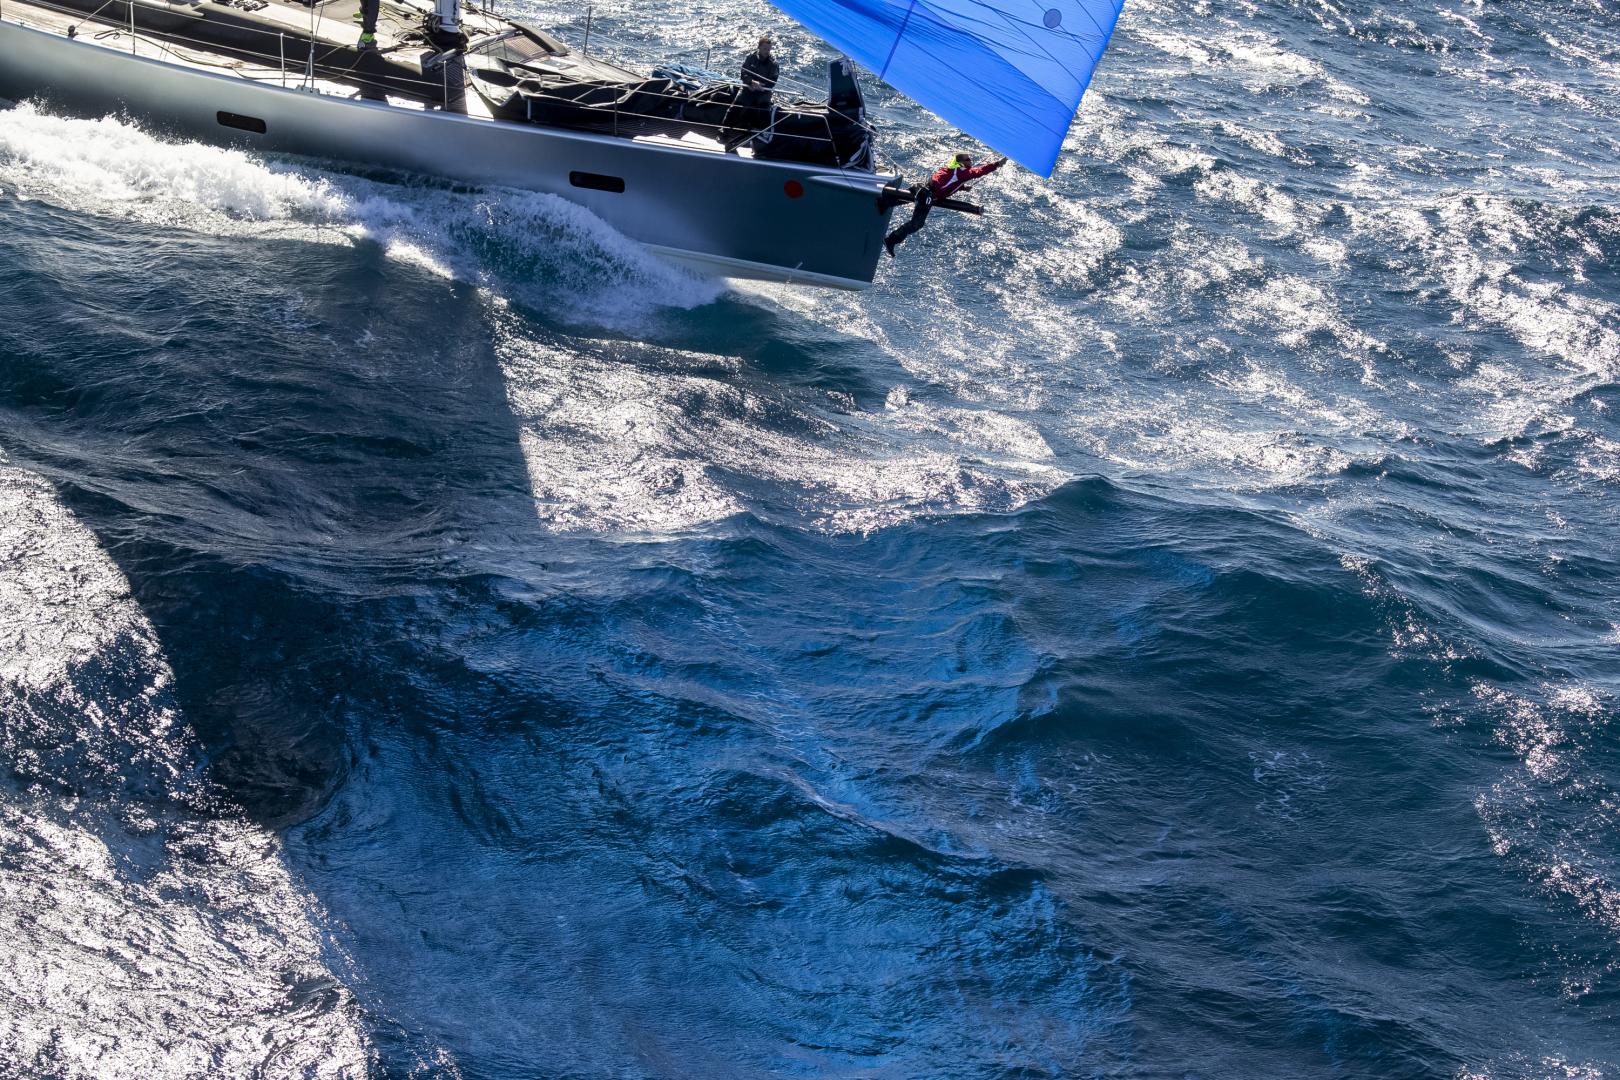 IMA President Benoît de Froidmont’s Wally 60 Wallyño won the combined inshore and offshore prize in the maxi's IRC 0 Cruiser class.